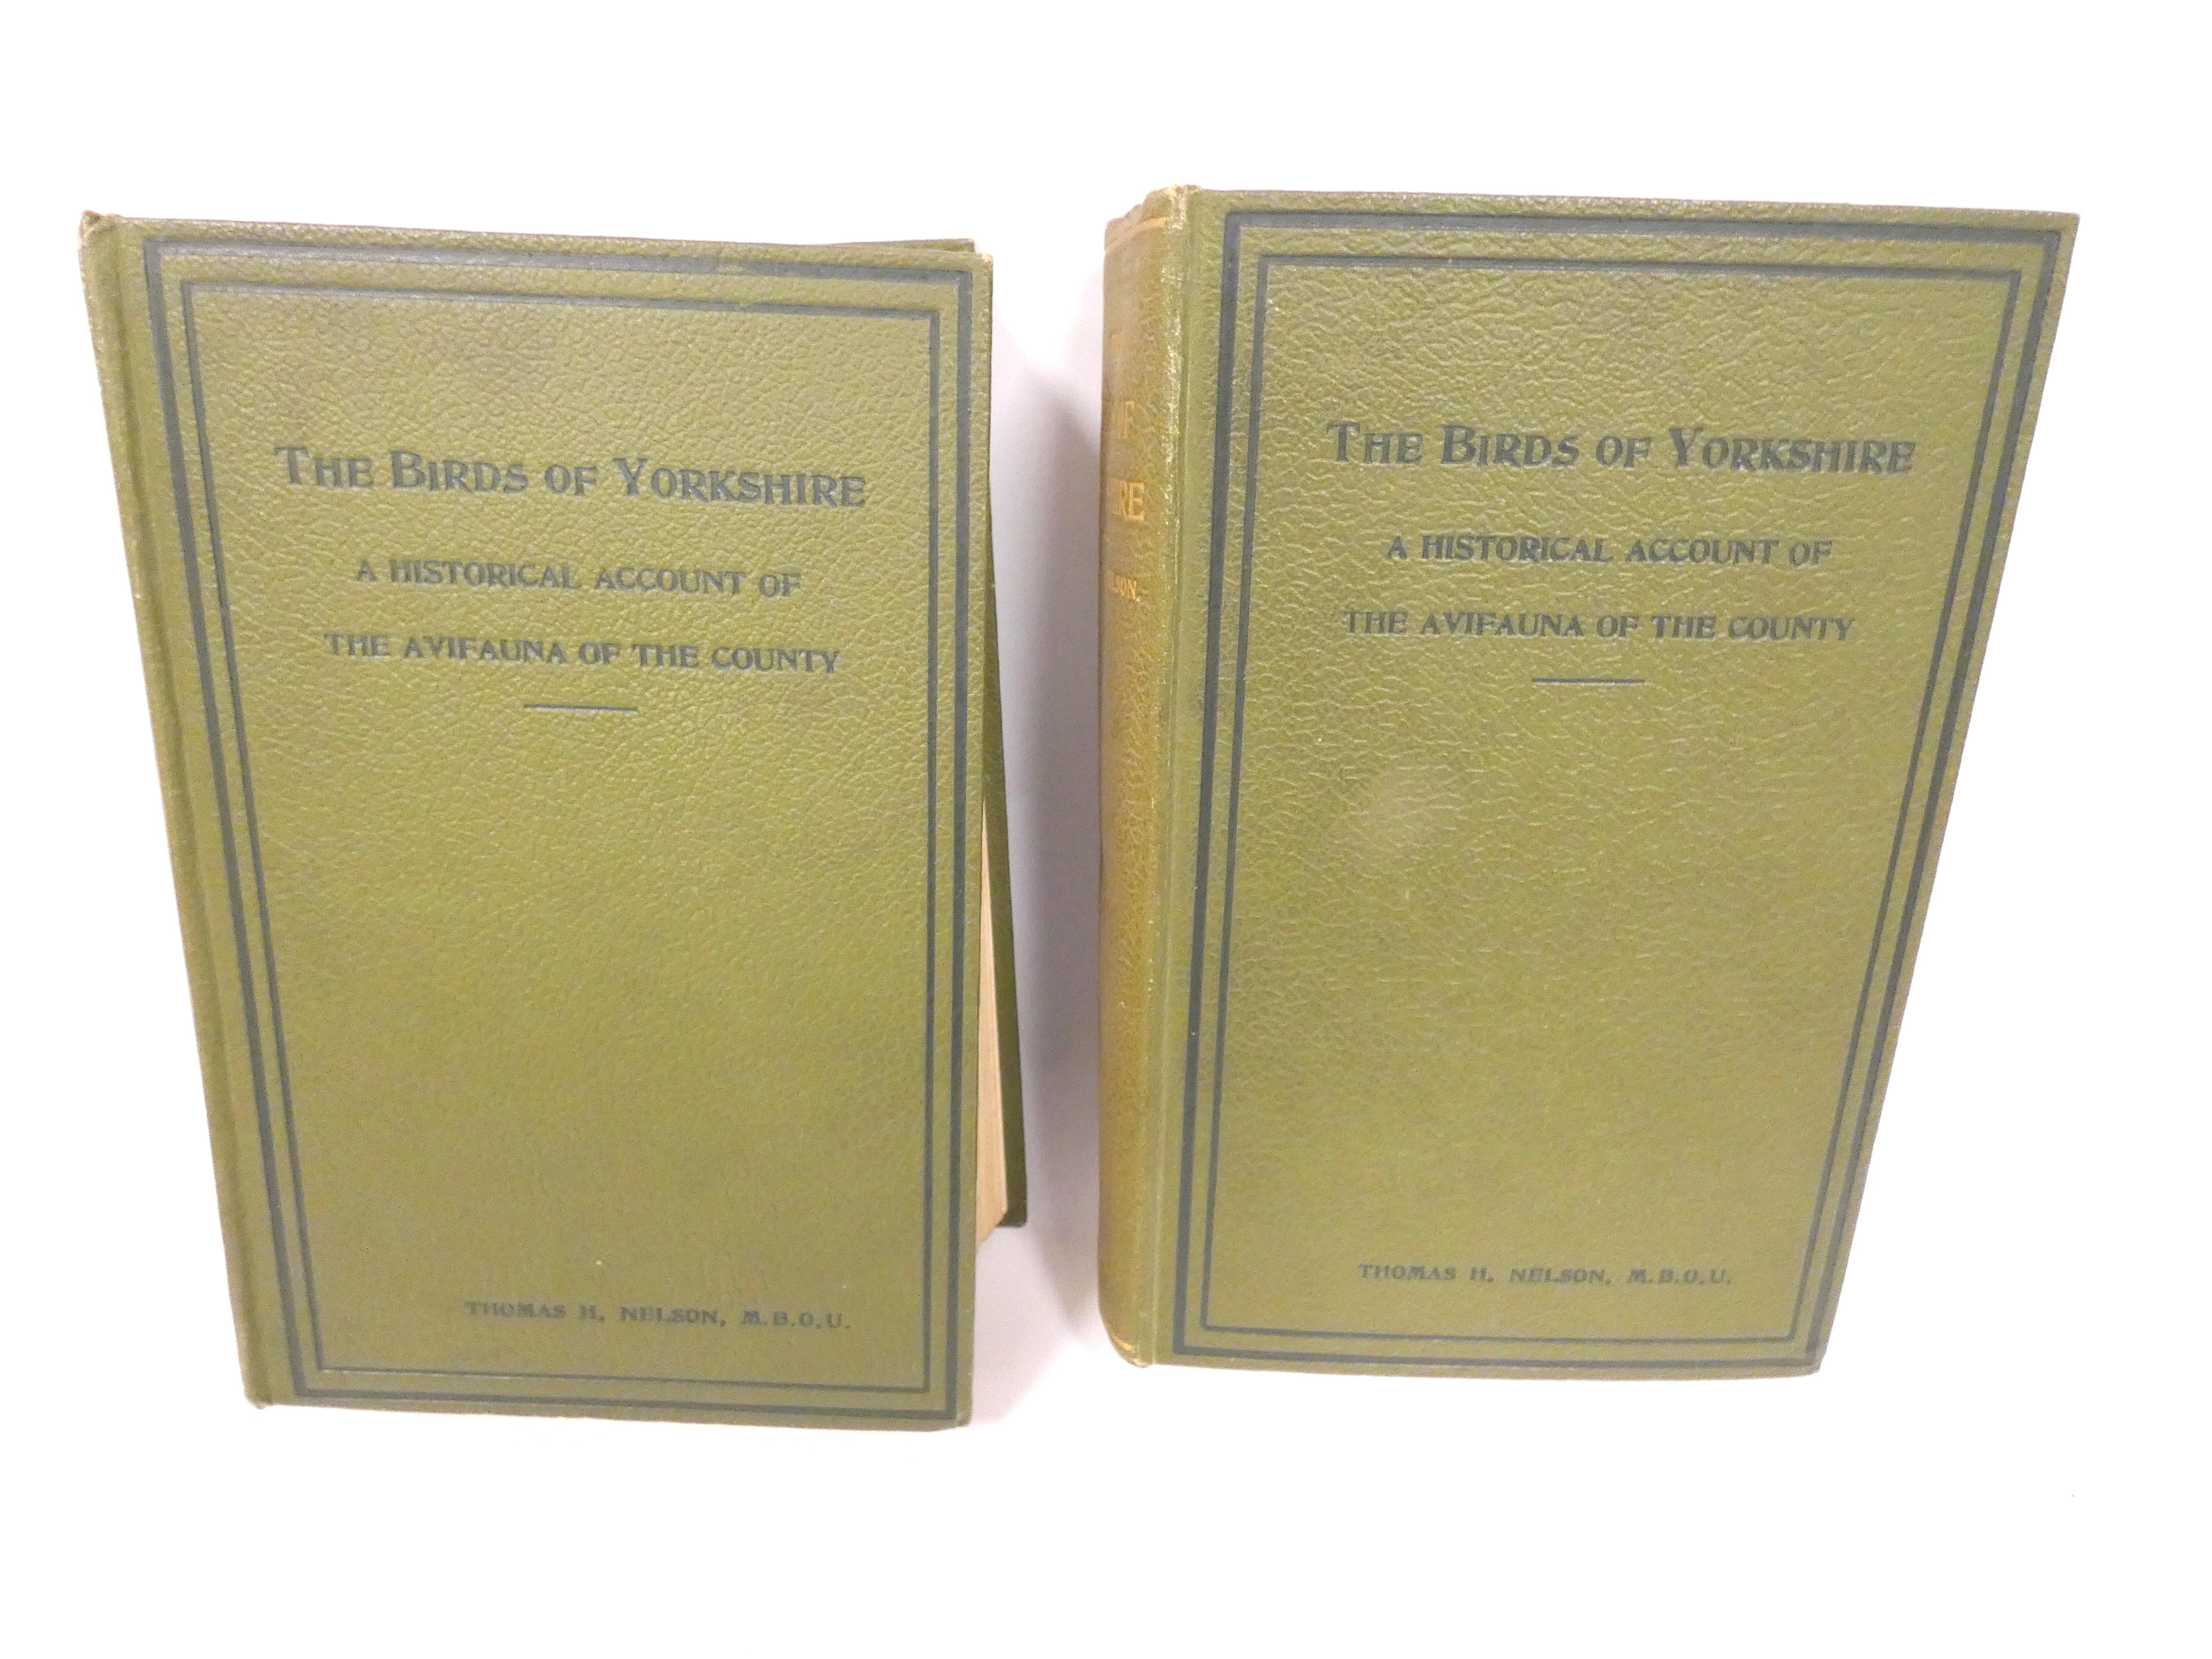 NELSON T. H.  The Birds of Yorkshire. 2 vols. Col. titles & many illus. Orig. green cloth. 1907.